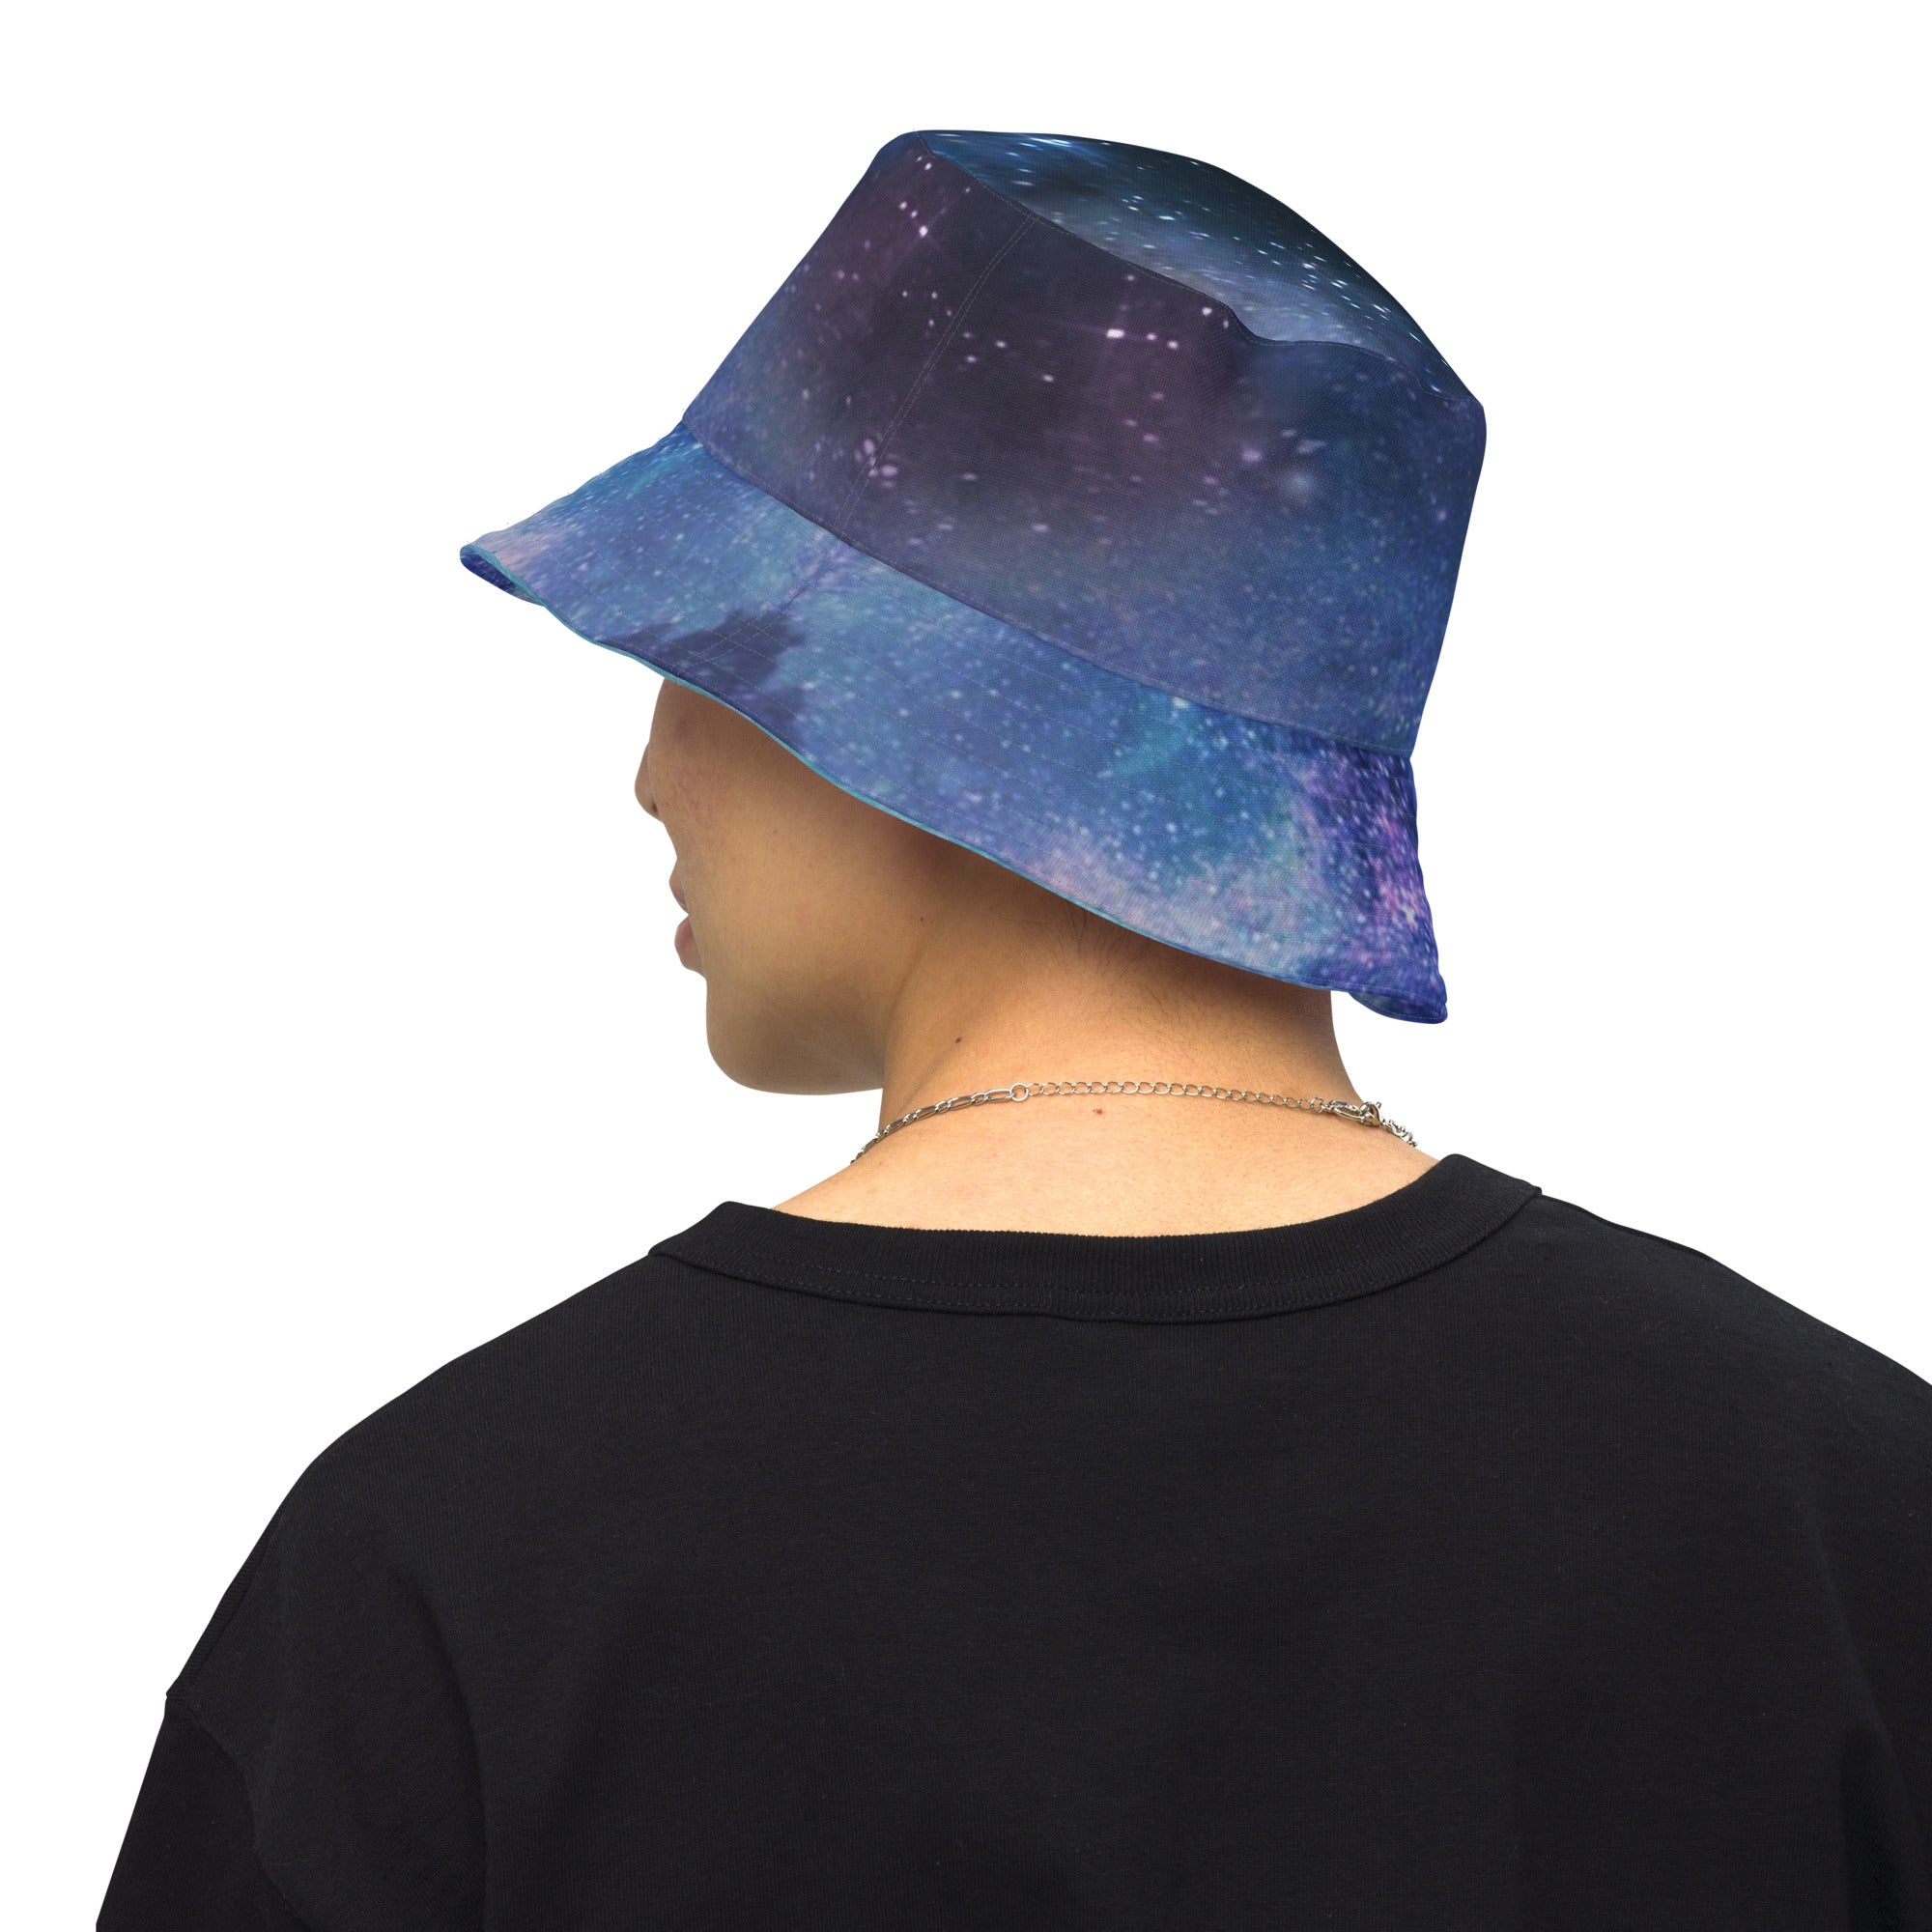 "Galactic Glamour: Elevate Your Style with Our Space Lovers Bucket Hat", lioness-love